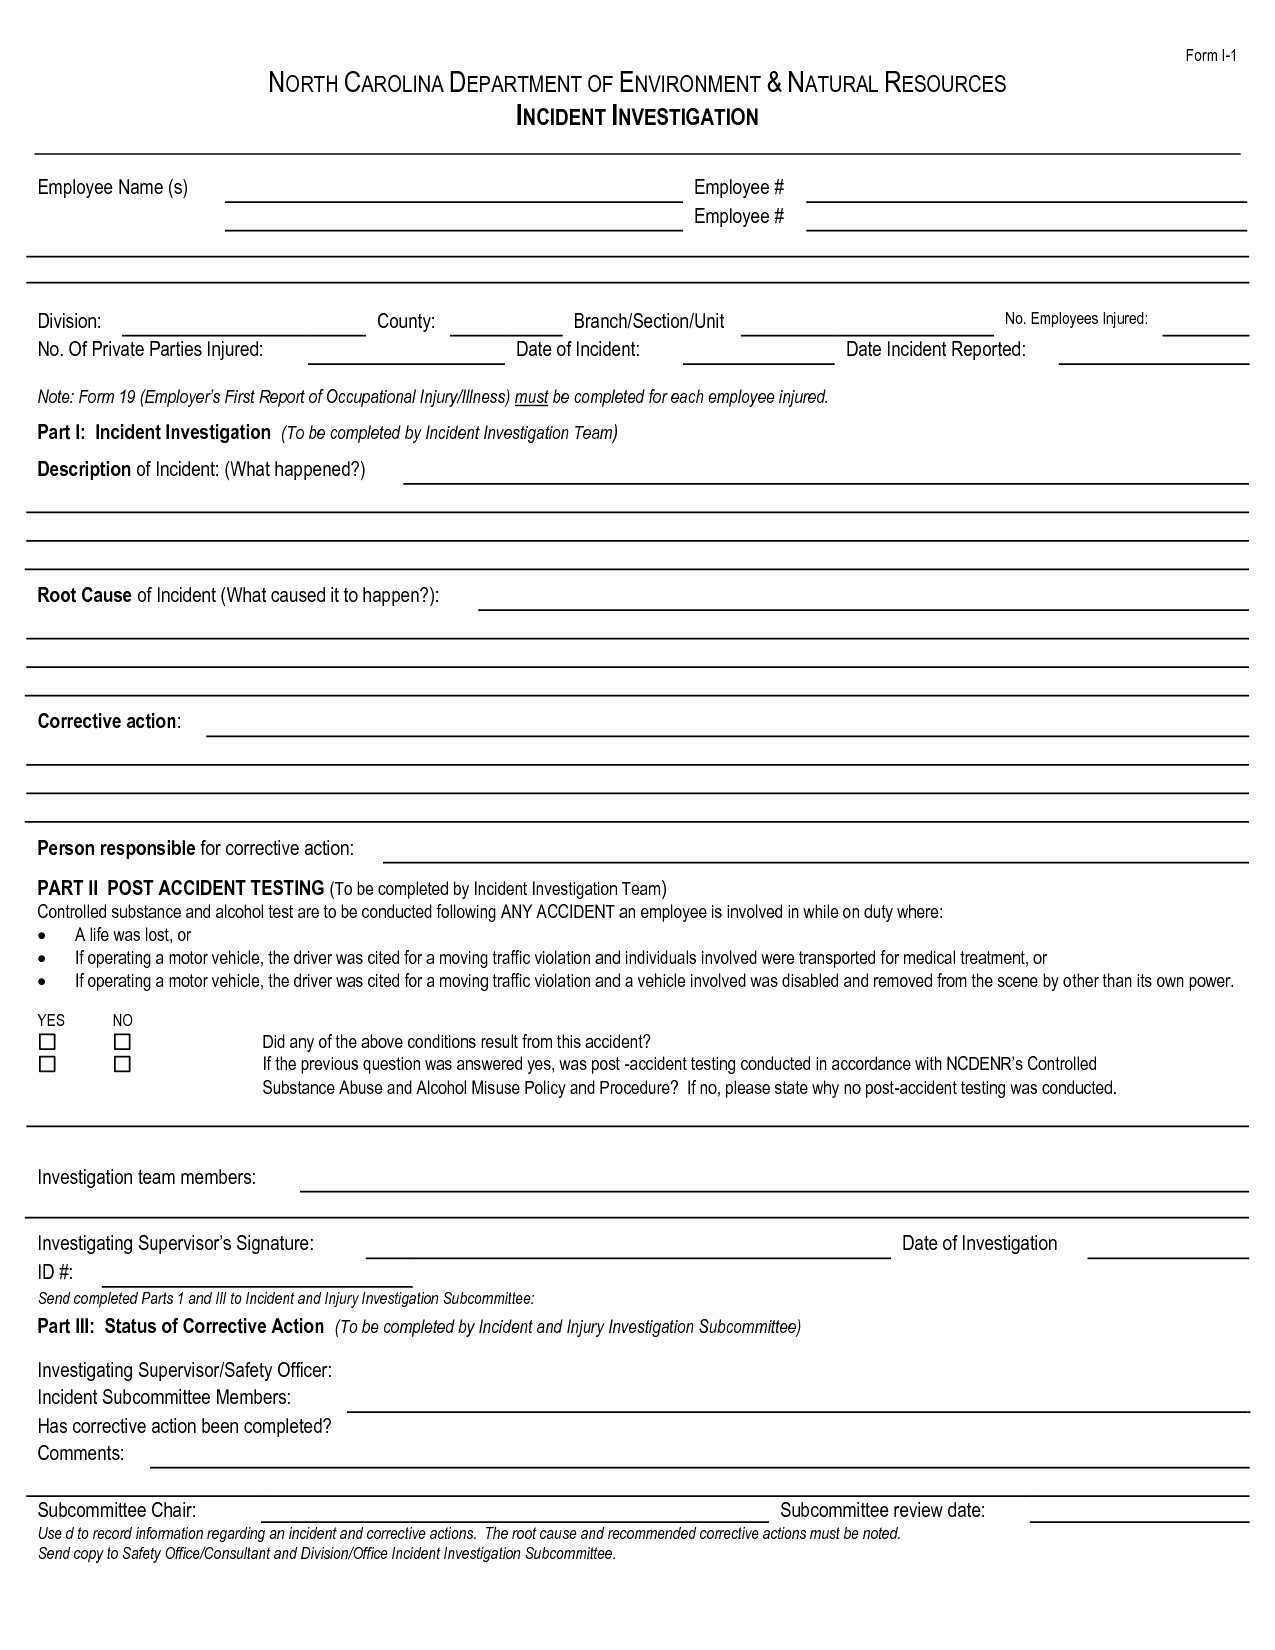 Incident Investigation Form Pdf Accident Template Word Osha Pertaining To Accident Report Form Template Uk